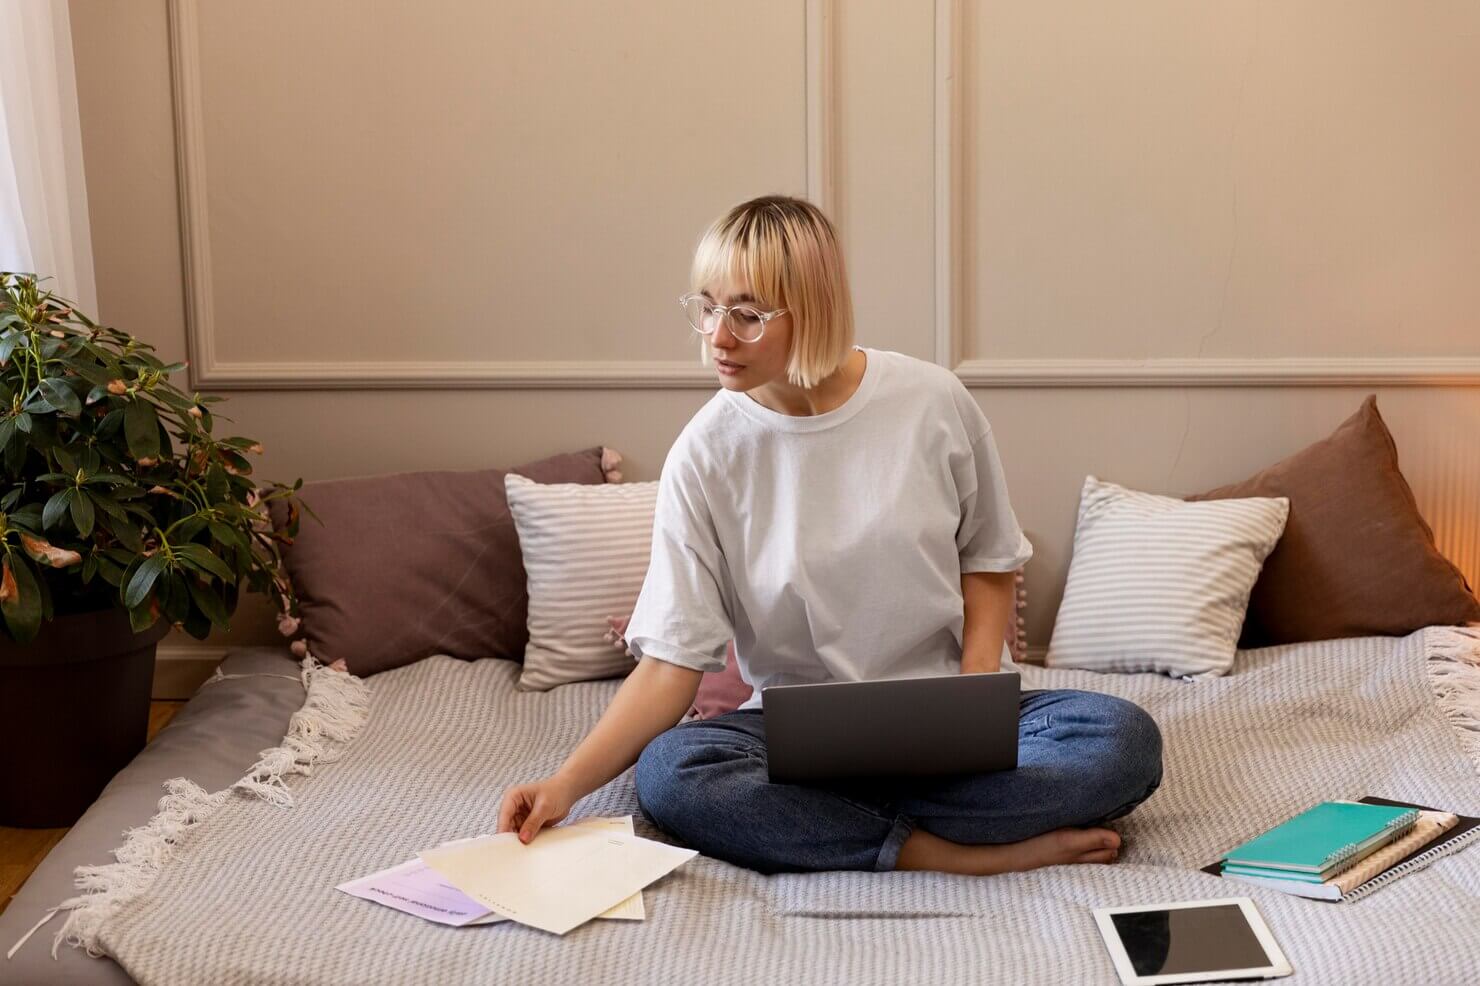 Young blonde woman working from home on her laptop. She has a better work-life balance